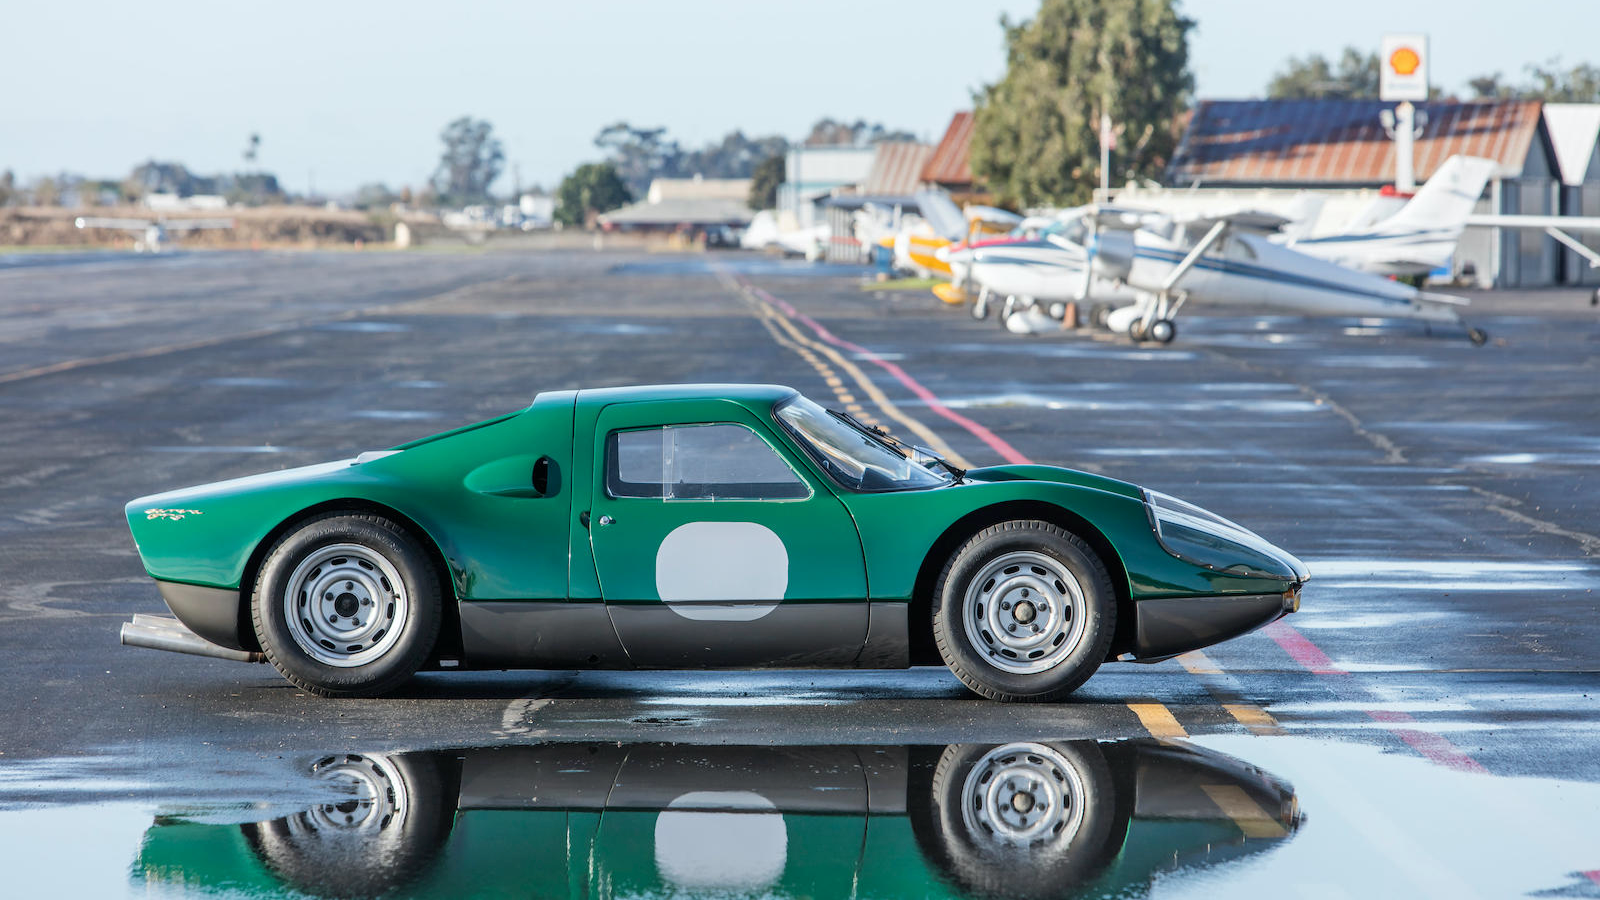 Dream cars for sale at the 2019 Scottsdale auctions